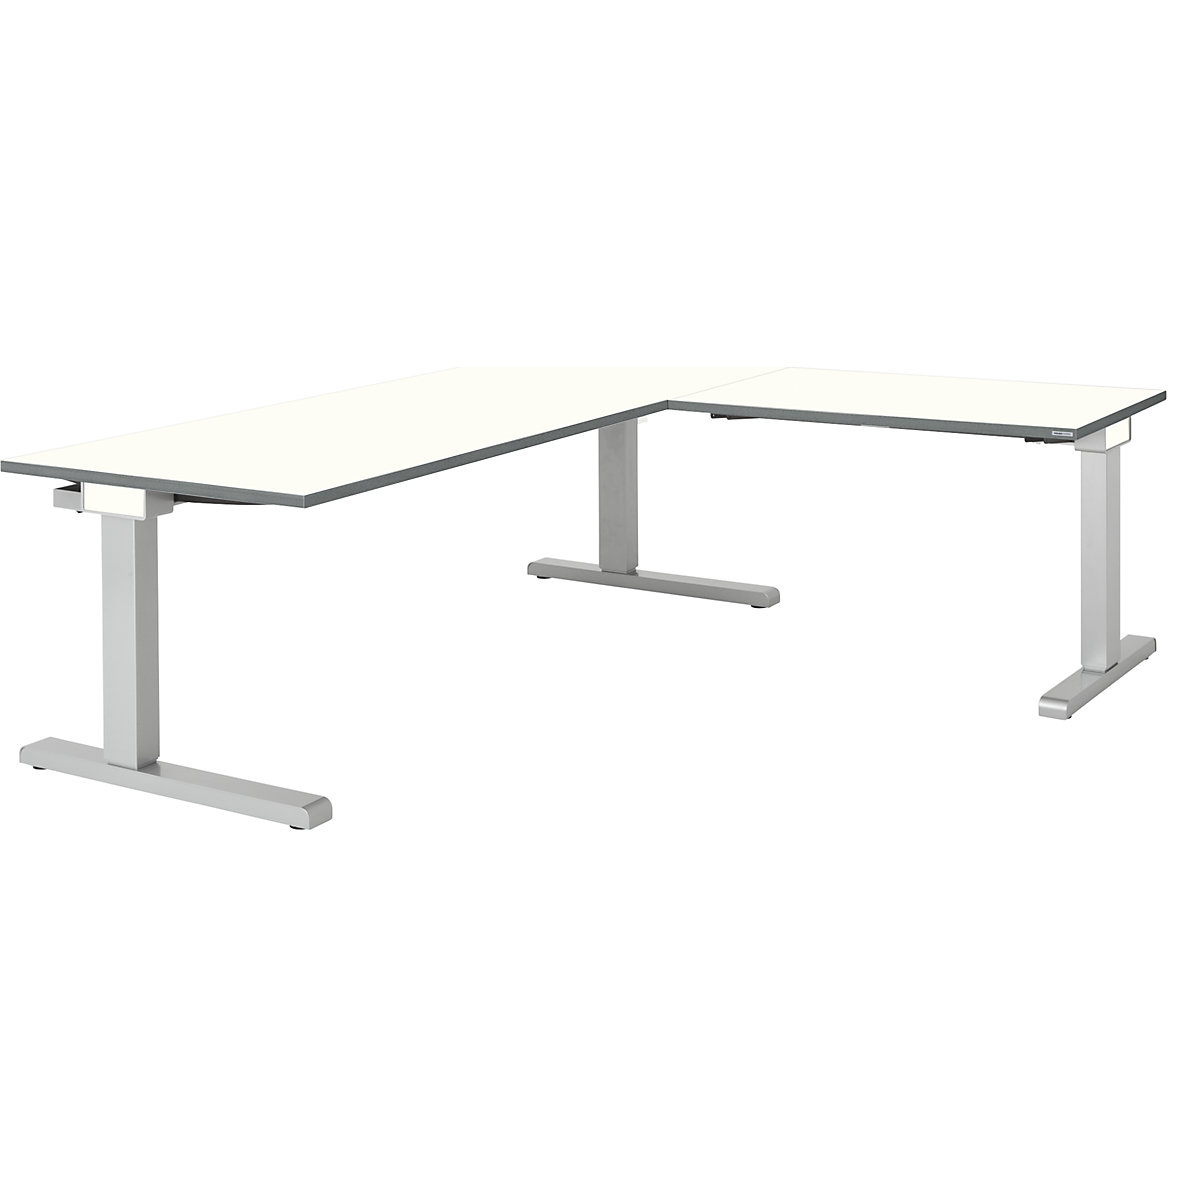 Desk, interlinked – mauser, WxD 1800 x 800 mm, angled extension on right (width 1000 mm), white top, white aluminium frame-3